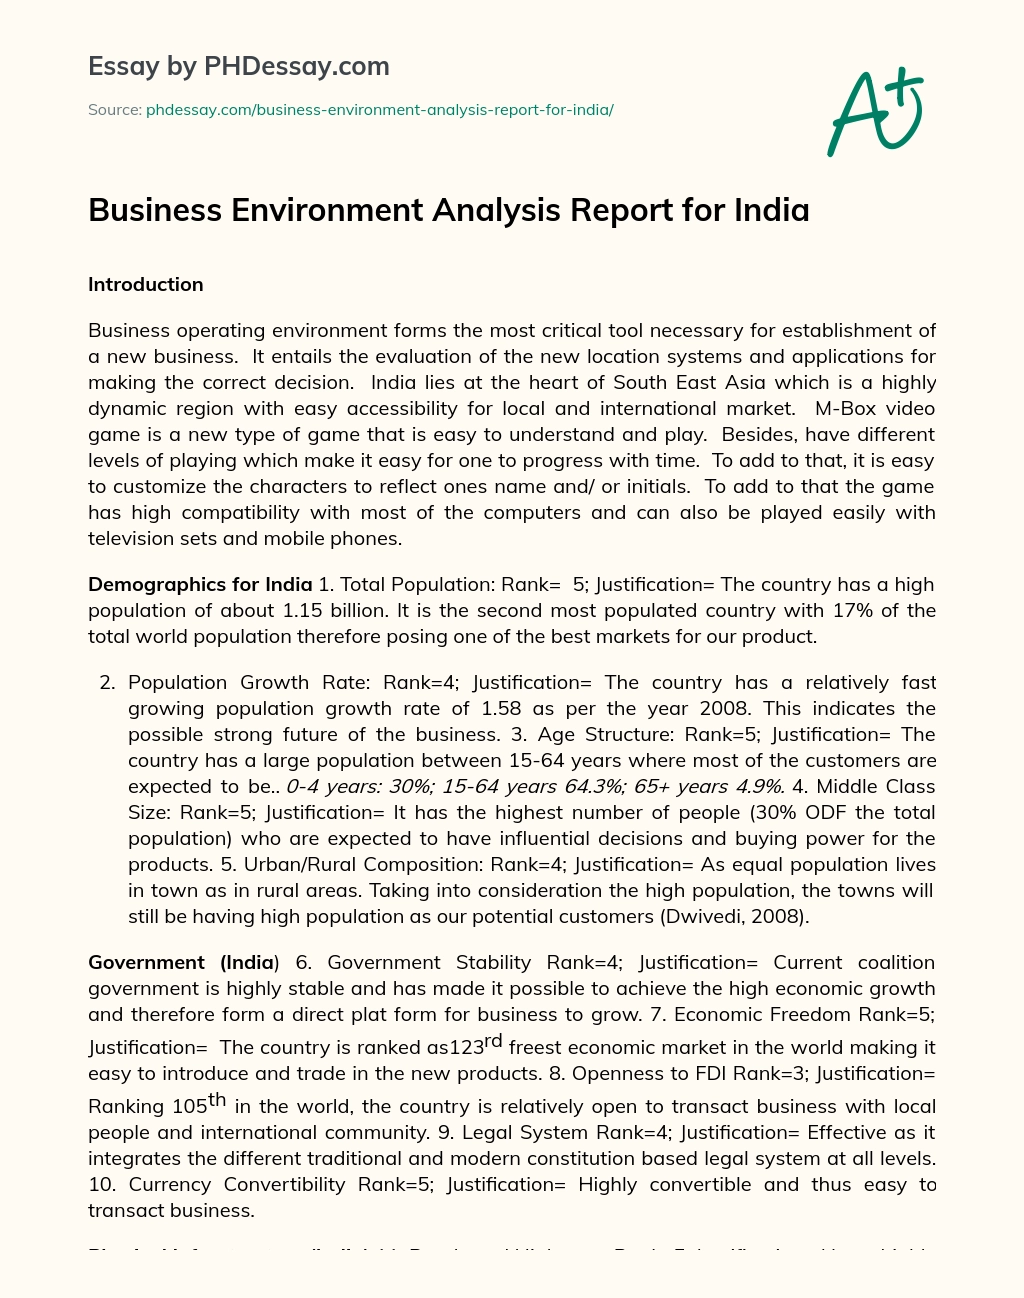 Business Environment Analysis Report for India essay